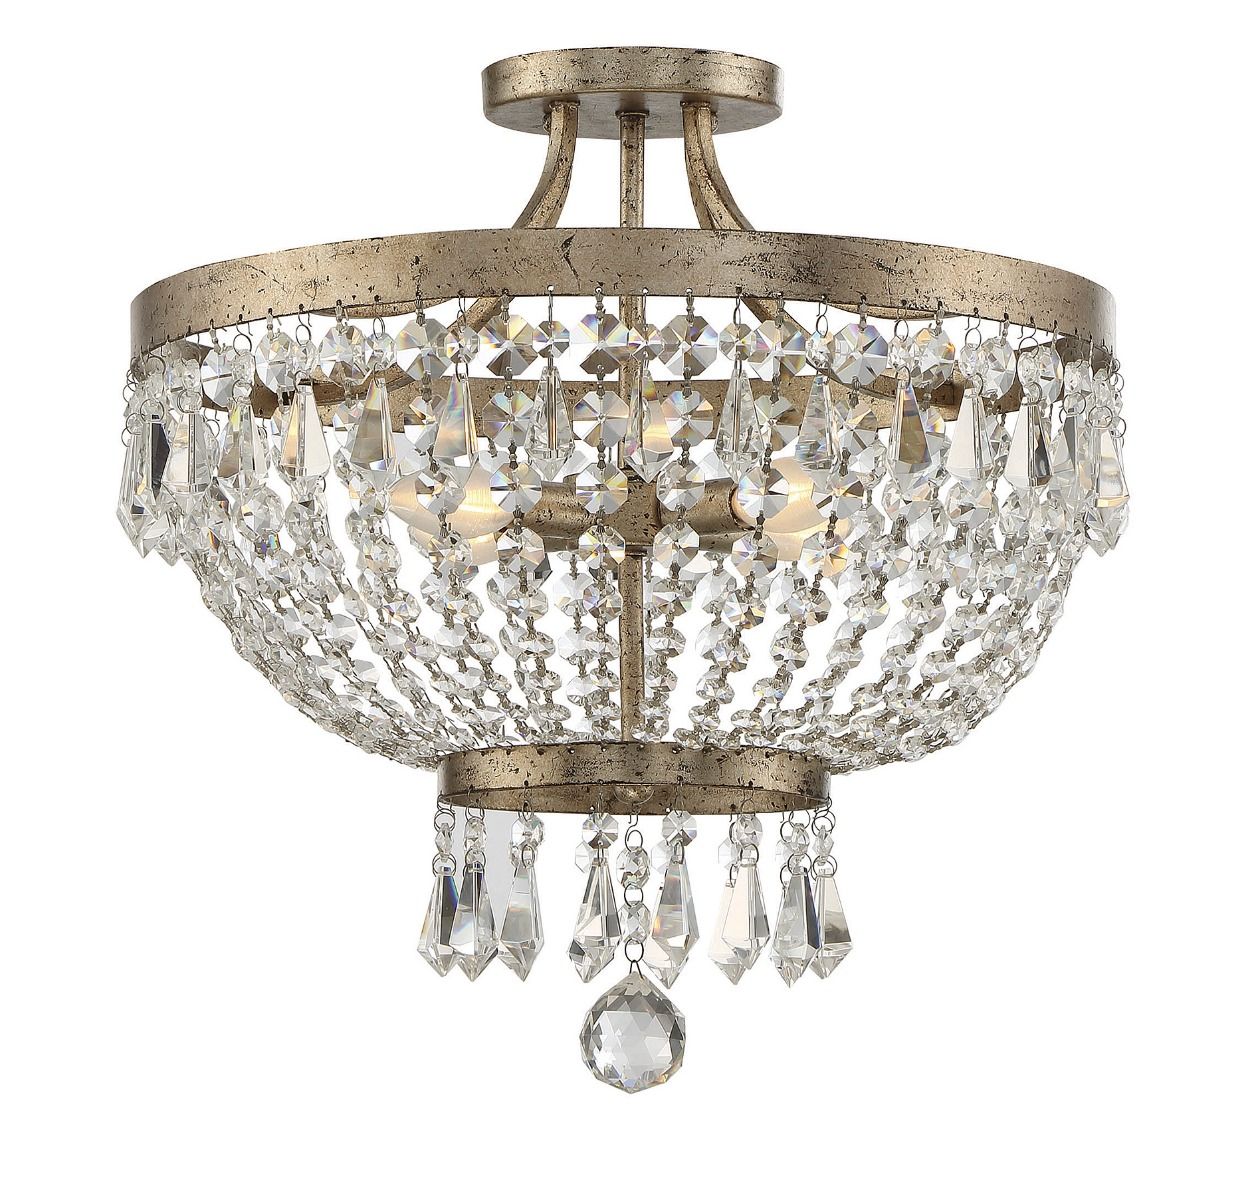 Savoy House Claiborne By Brian Thomas 18 Convertible Crystal Ceiling Light In Avalite